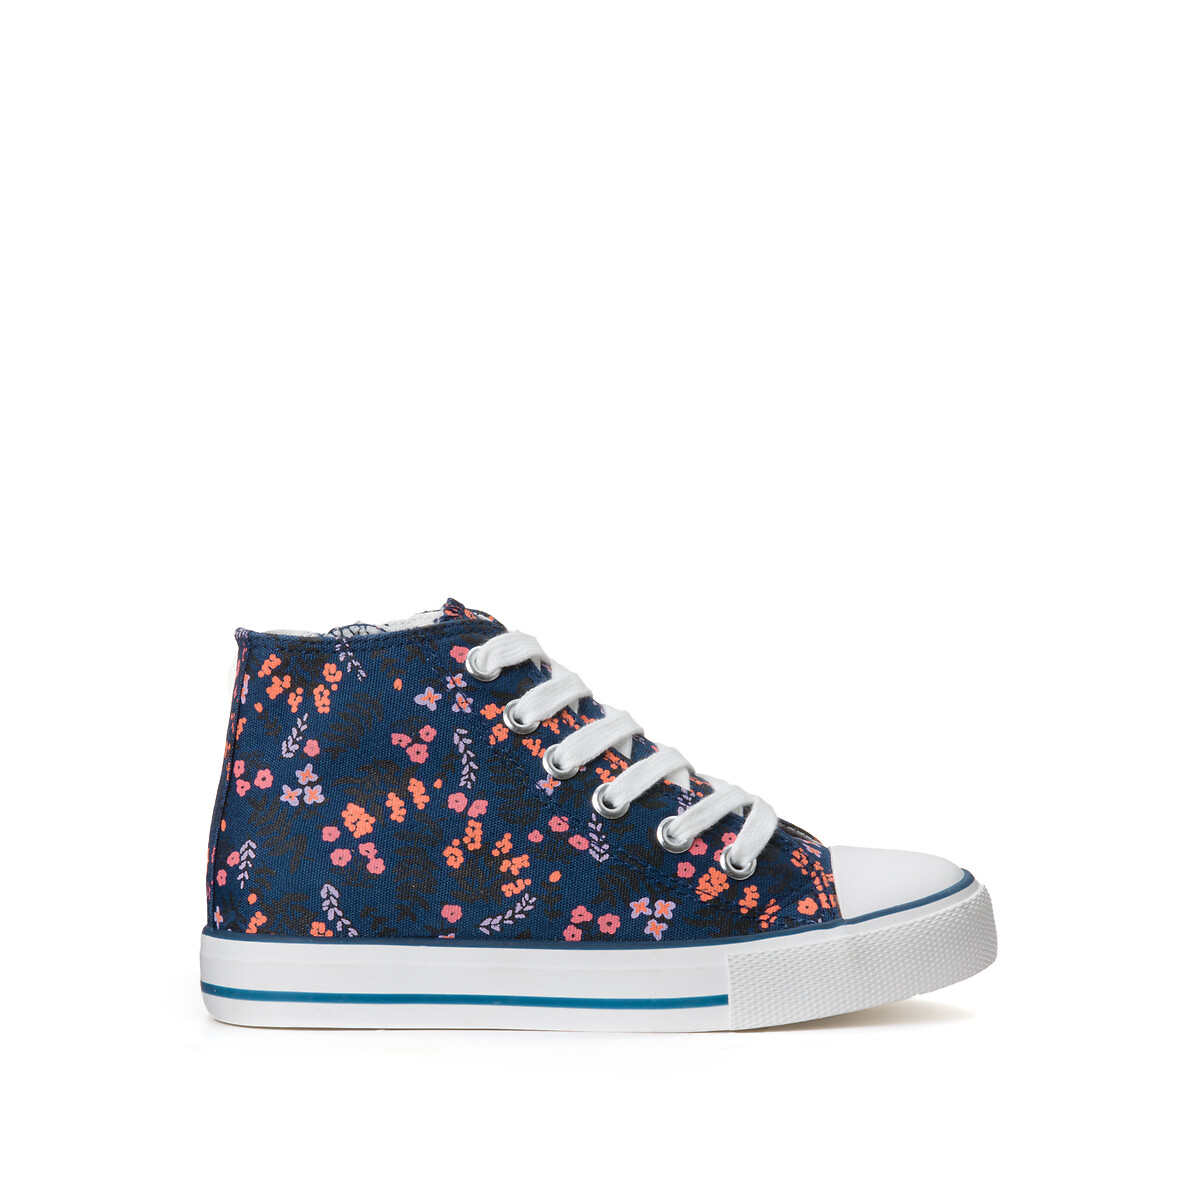 Kids High Top Trainers in Floral Print with Zip Fastening